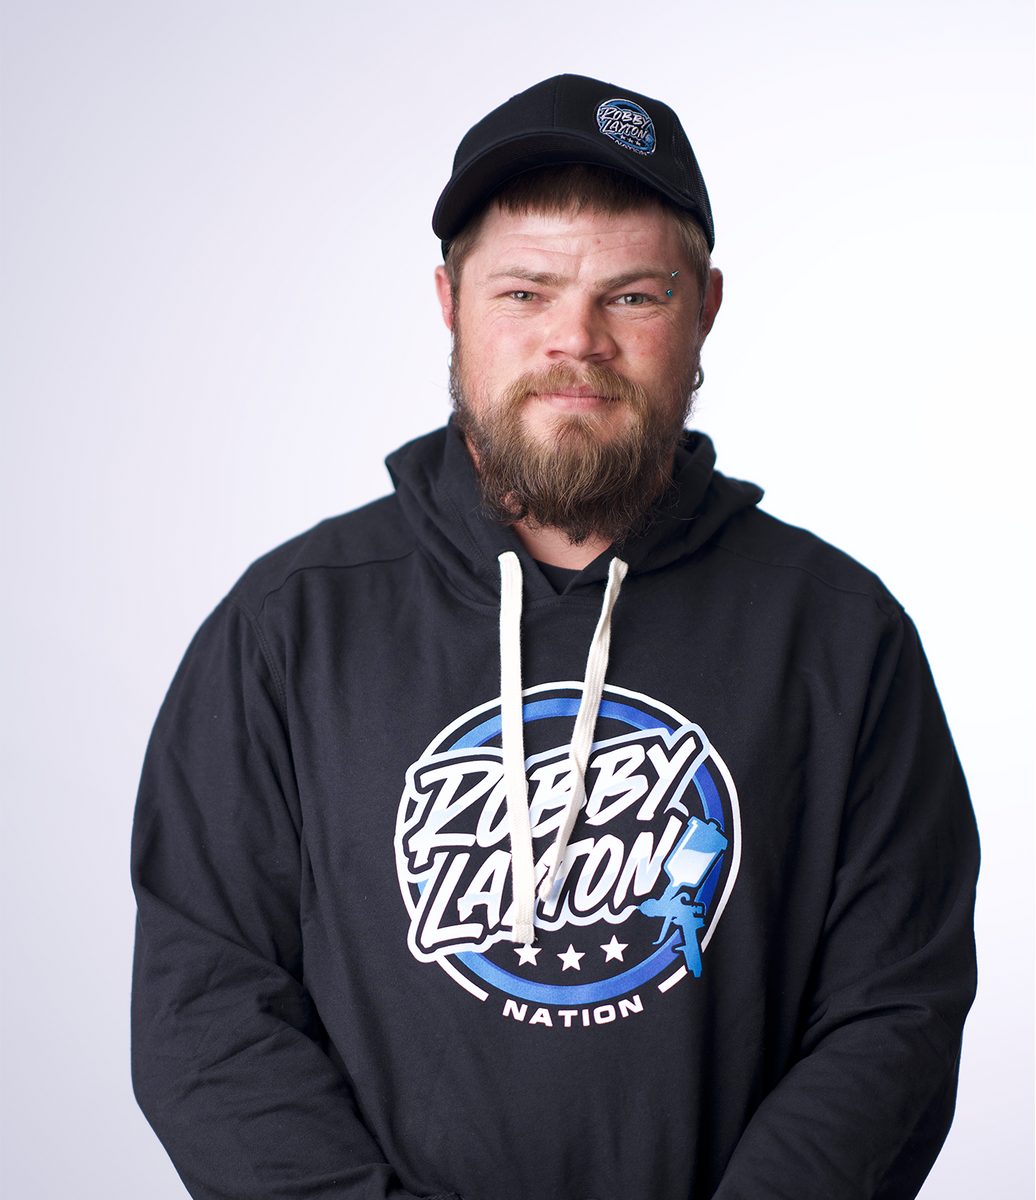 Robby Layton Nation Hoodie – Robby Layton Nation Official Store